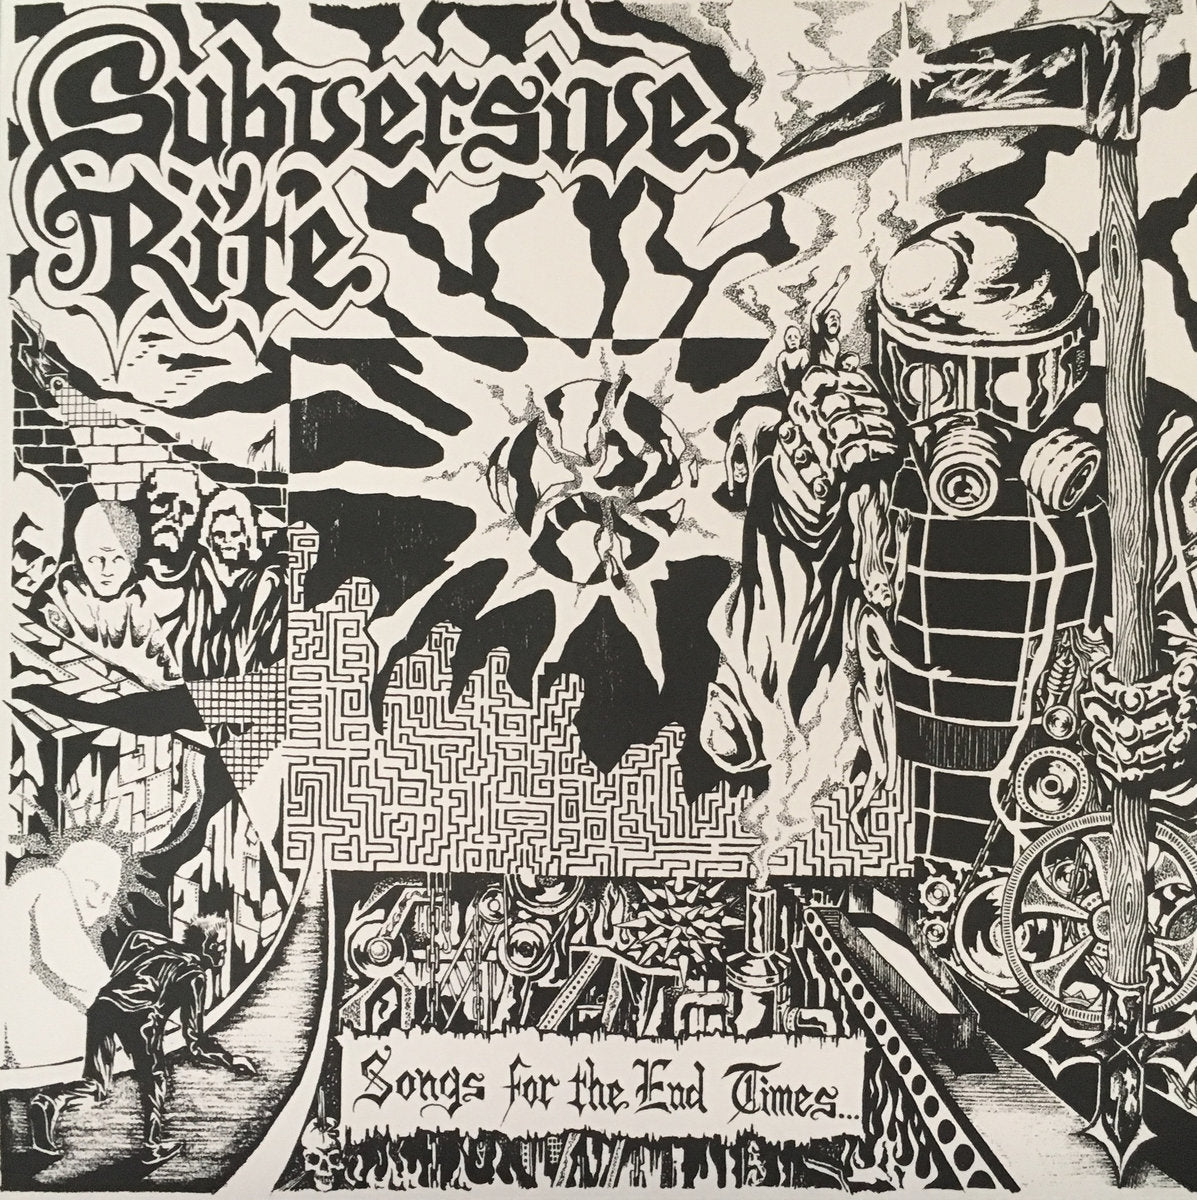 Subversive Rite - Songs for the End Times LP - Vinyl - Bloody Master